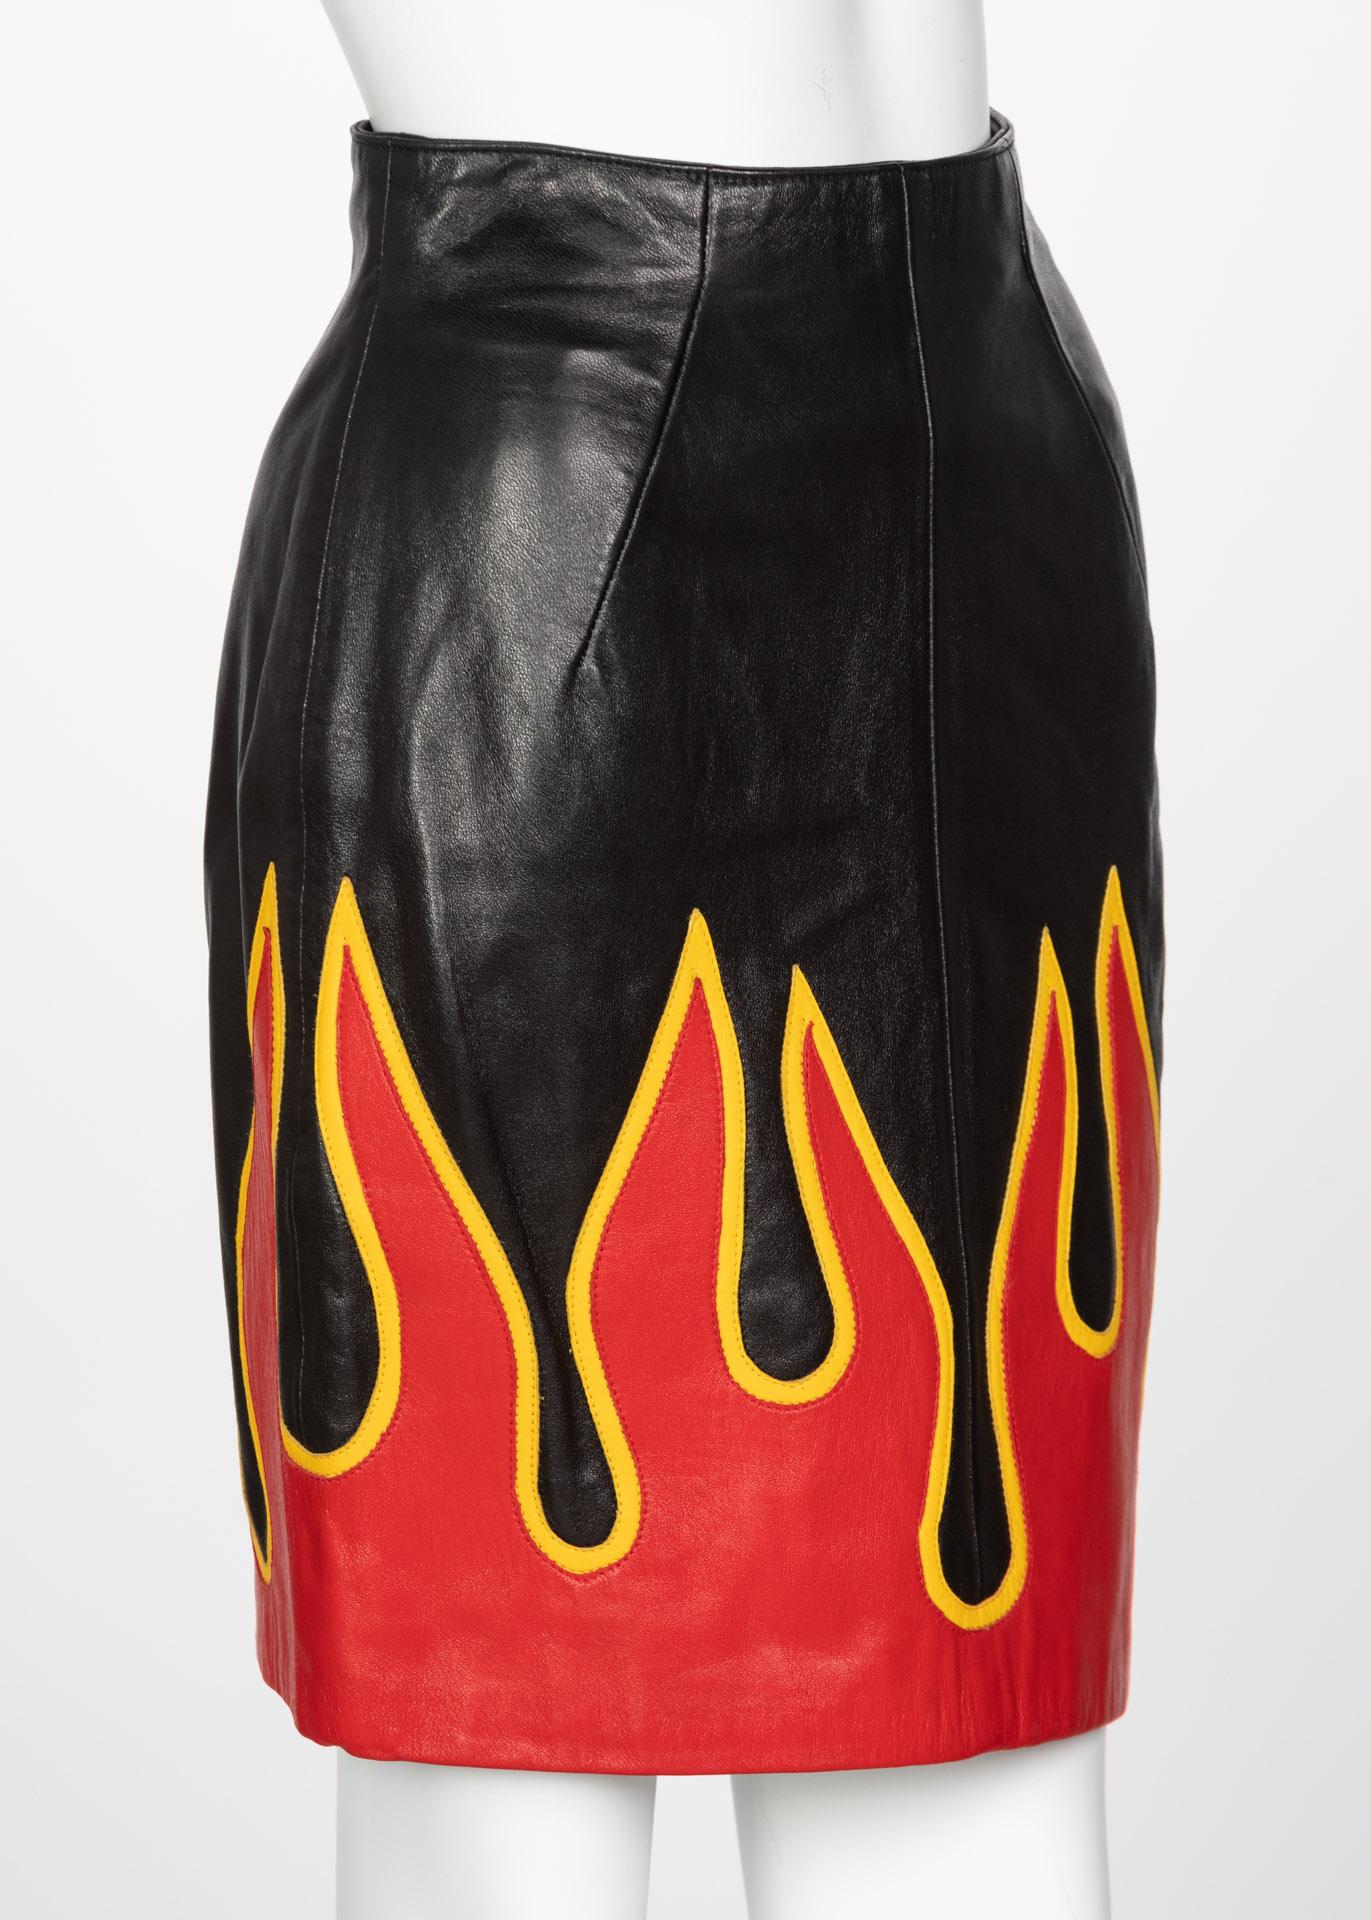 Michael Hoban North Beach Leather Black Red Flames Jacket Skirt Set, 1990s For Sale 5